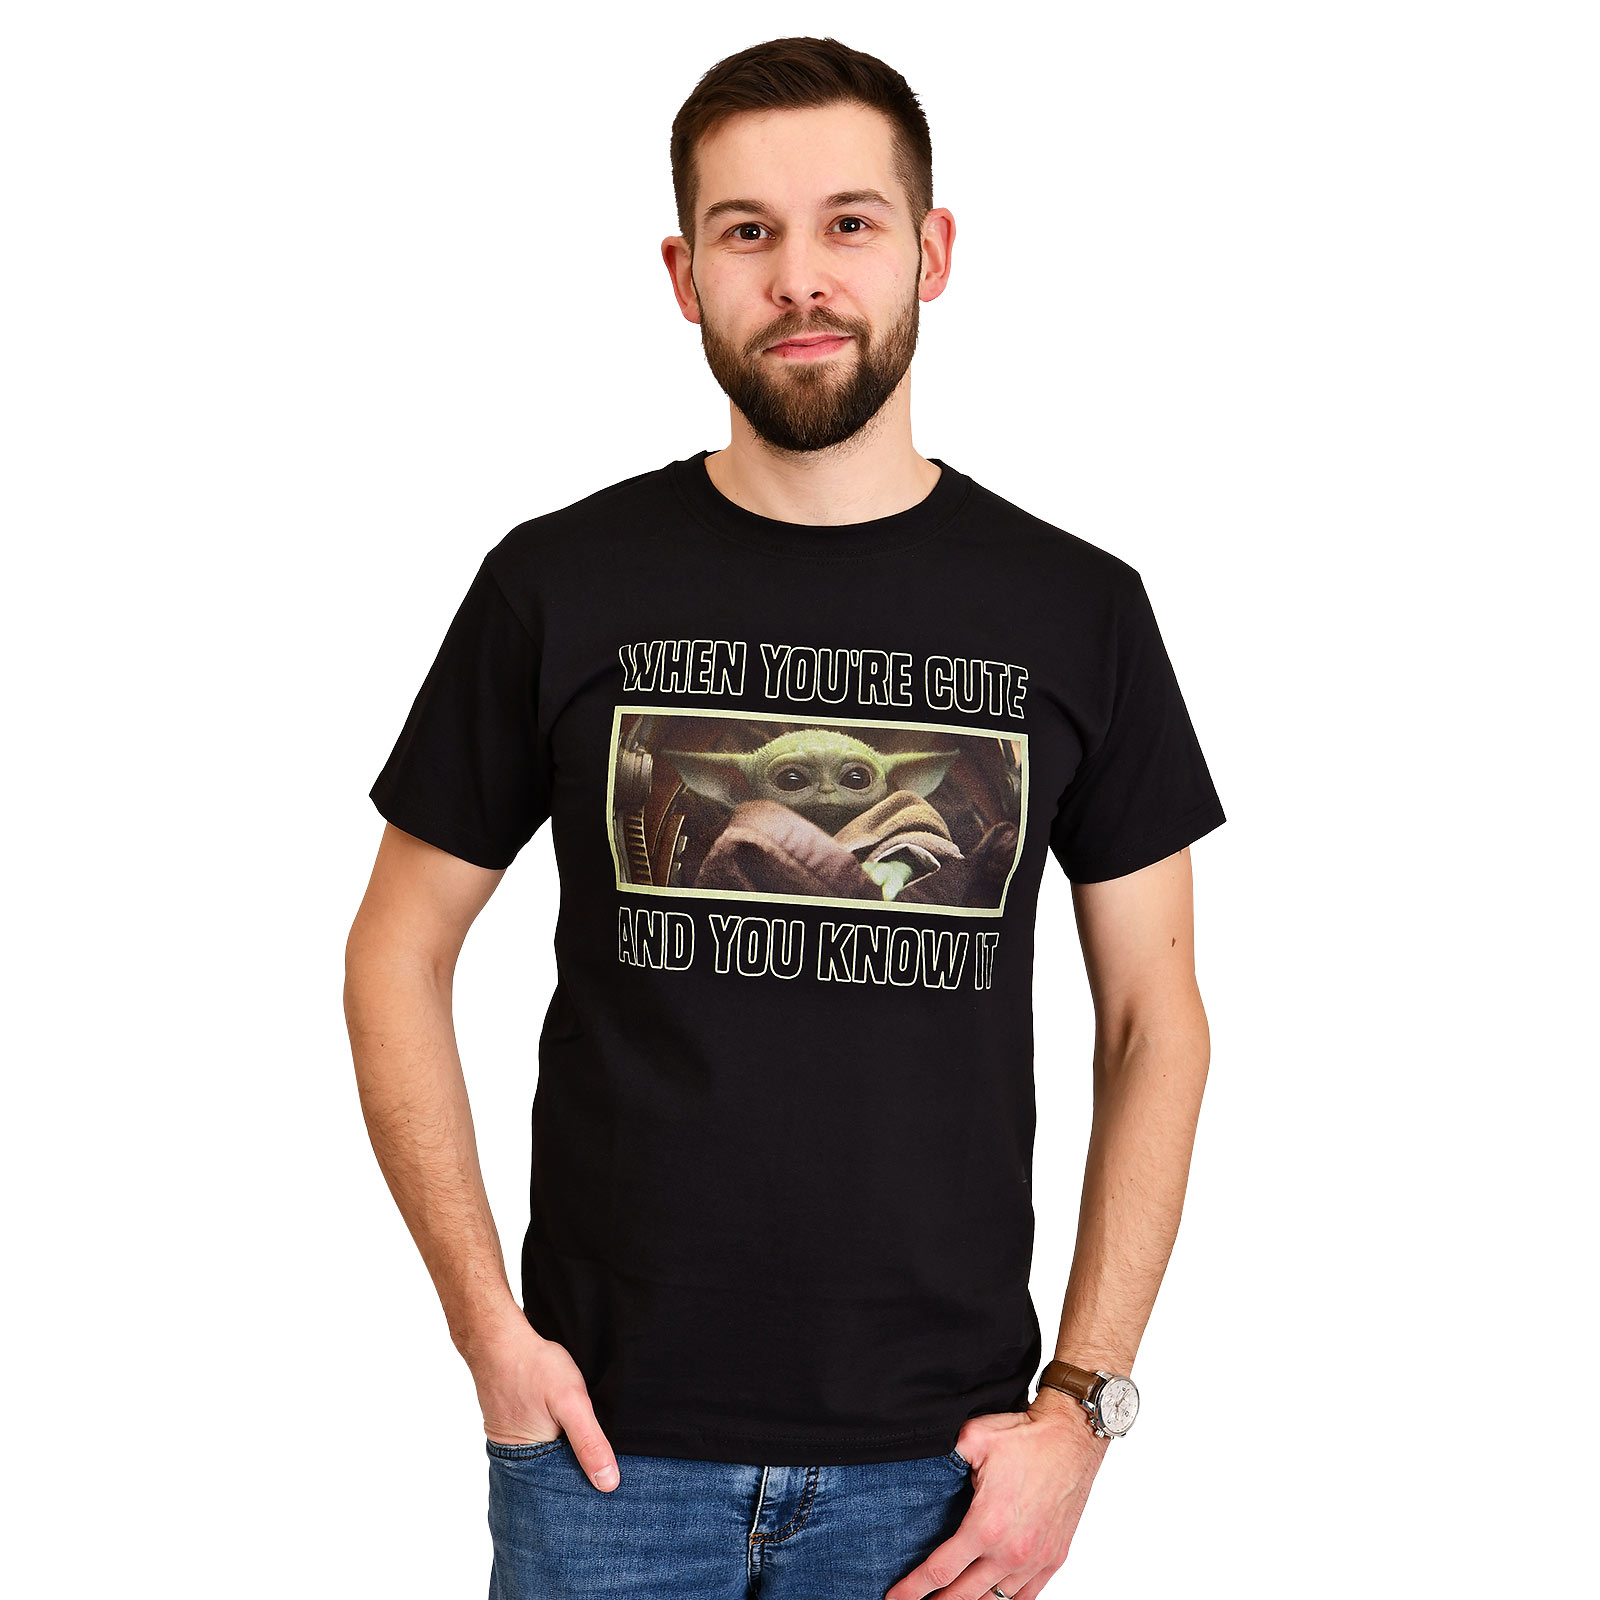 The Child Cute and You Know It T-Shirt - Star Wars The Mandalorian